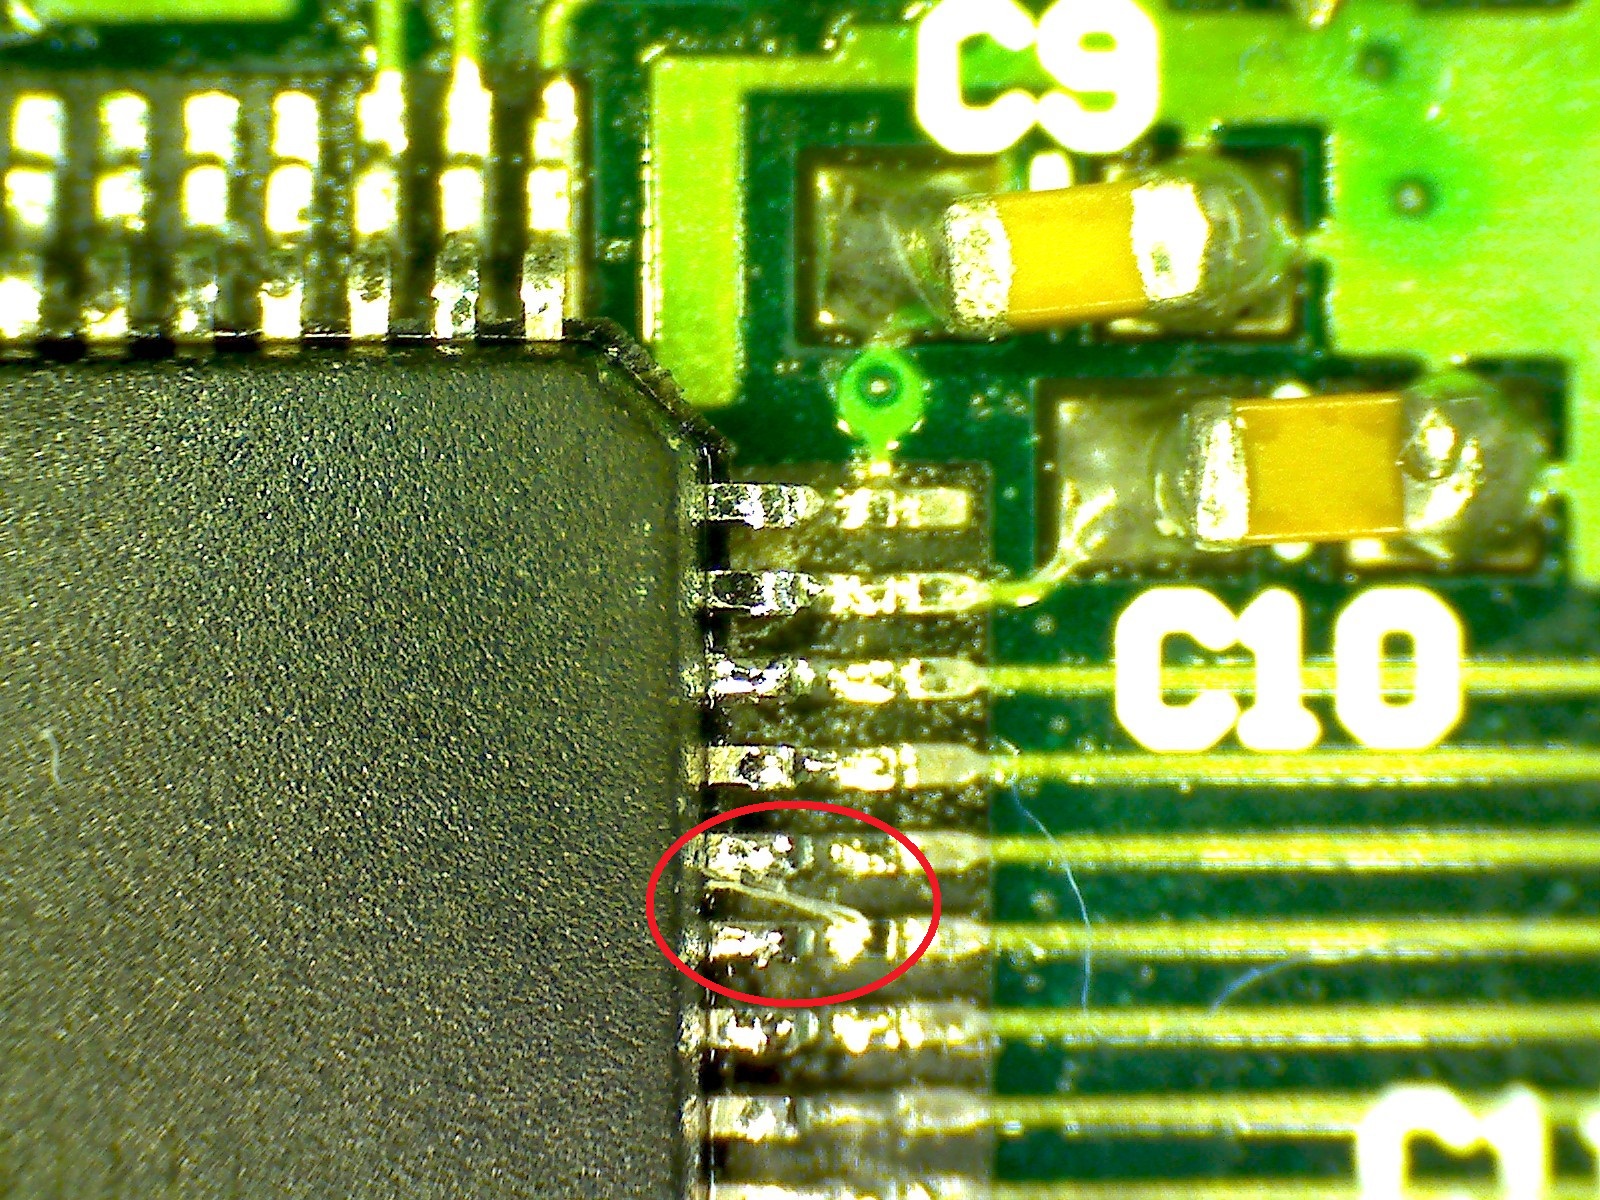 Flux residue ontop of some microcontroller pins.